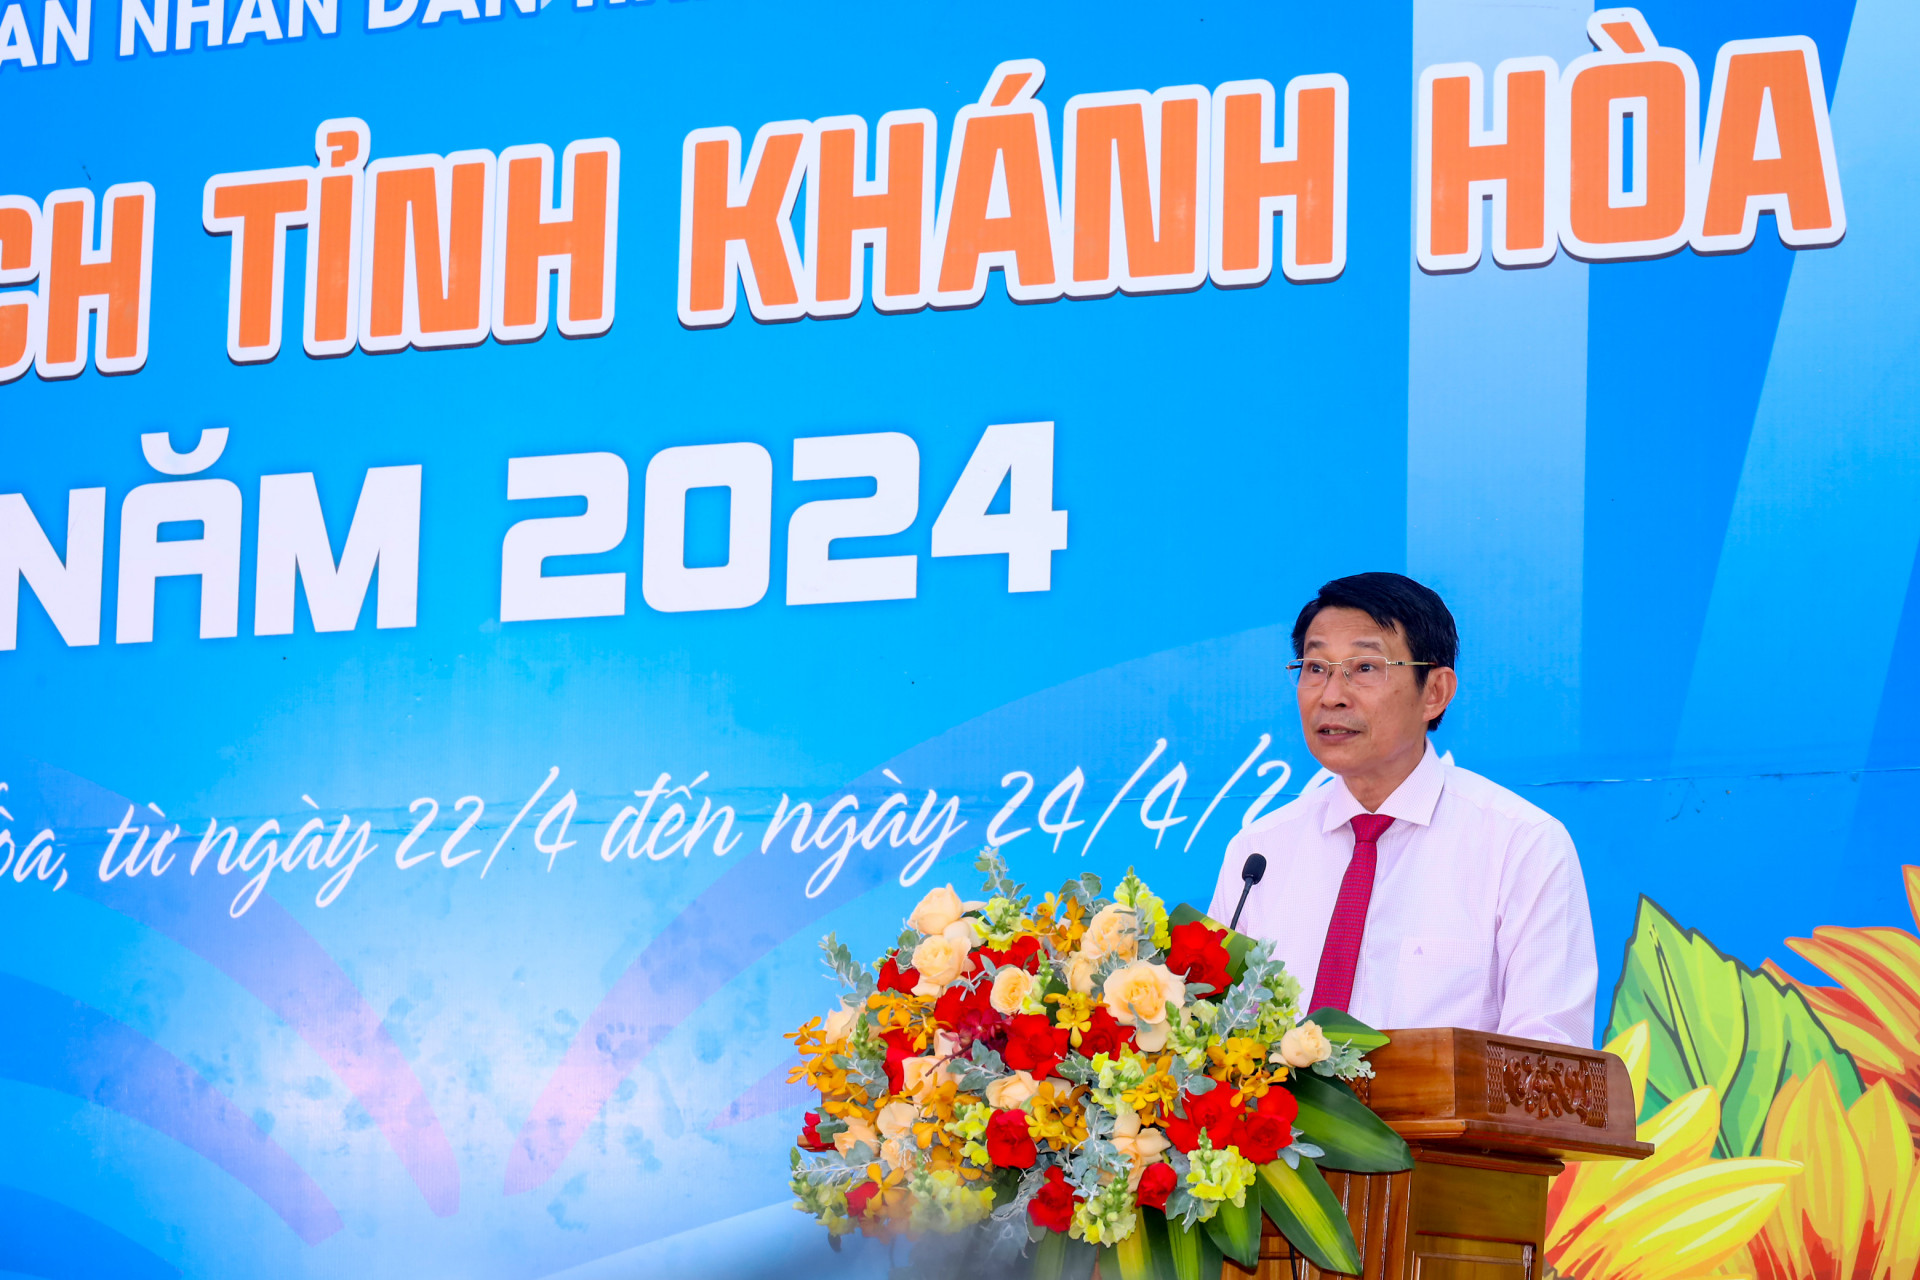 Dinh Van Thieu delivering speech at the opening ceremony

